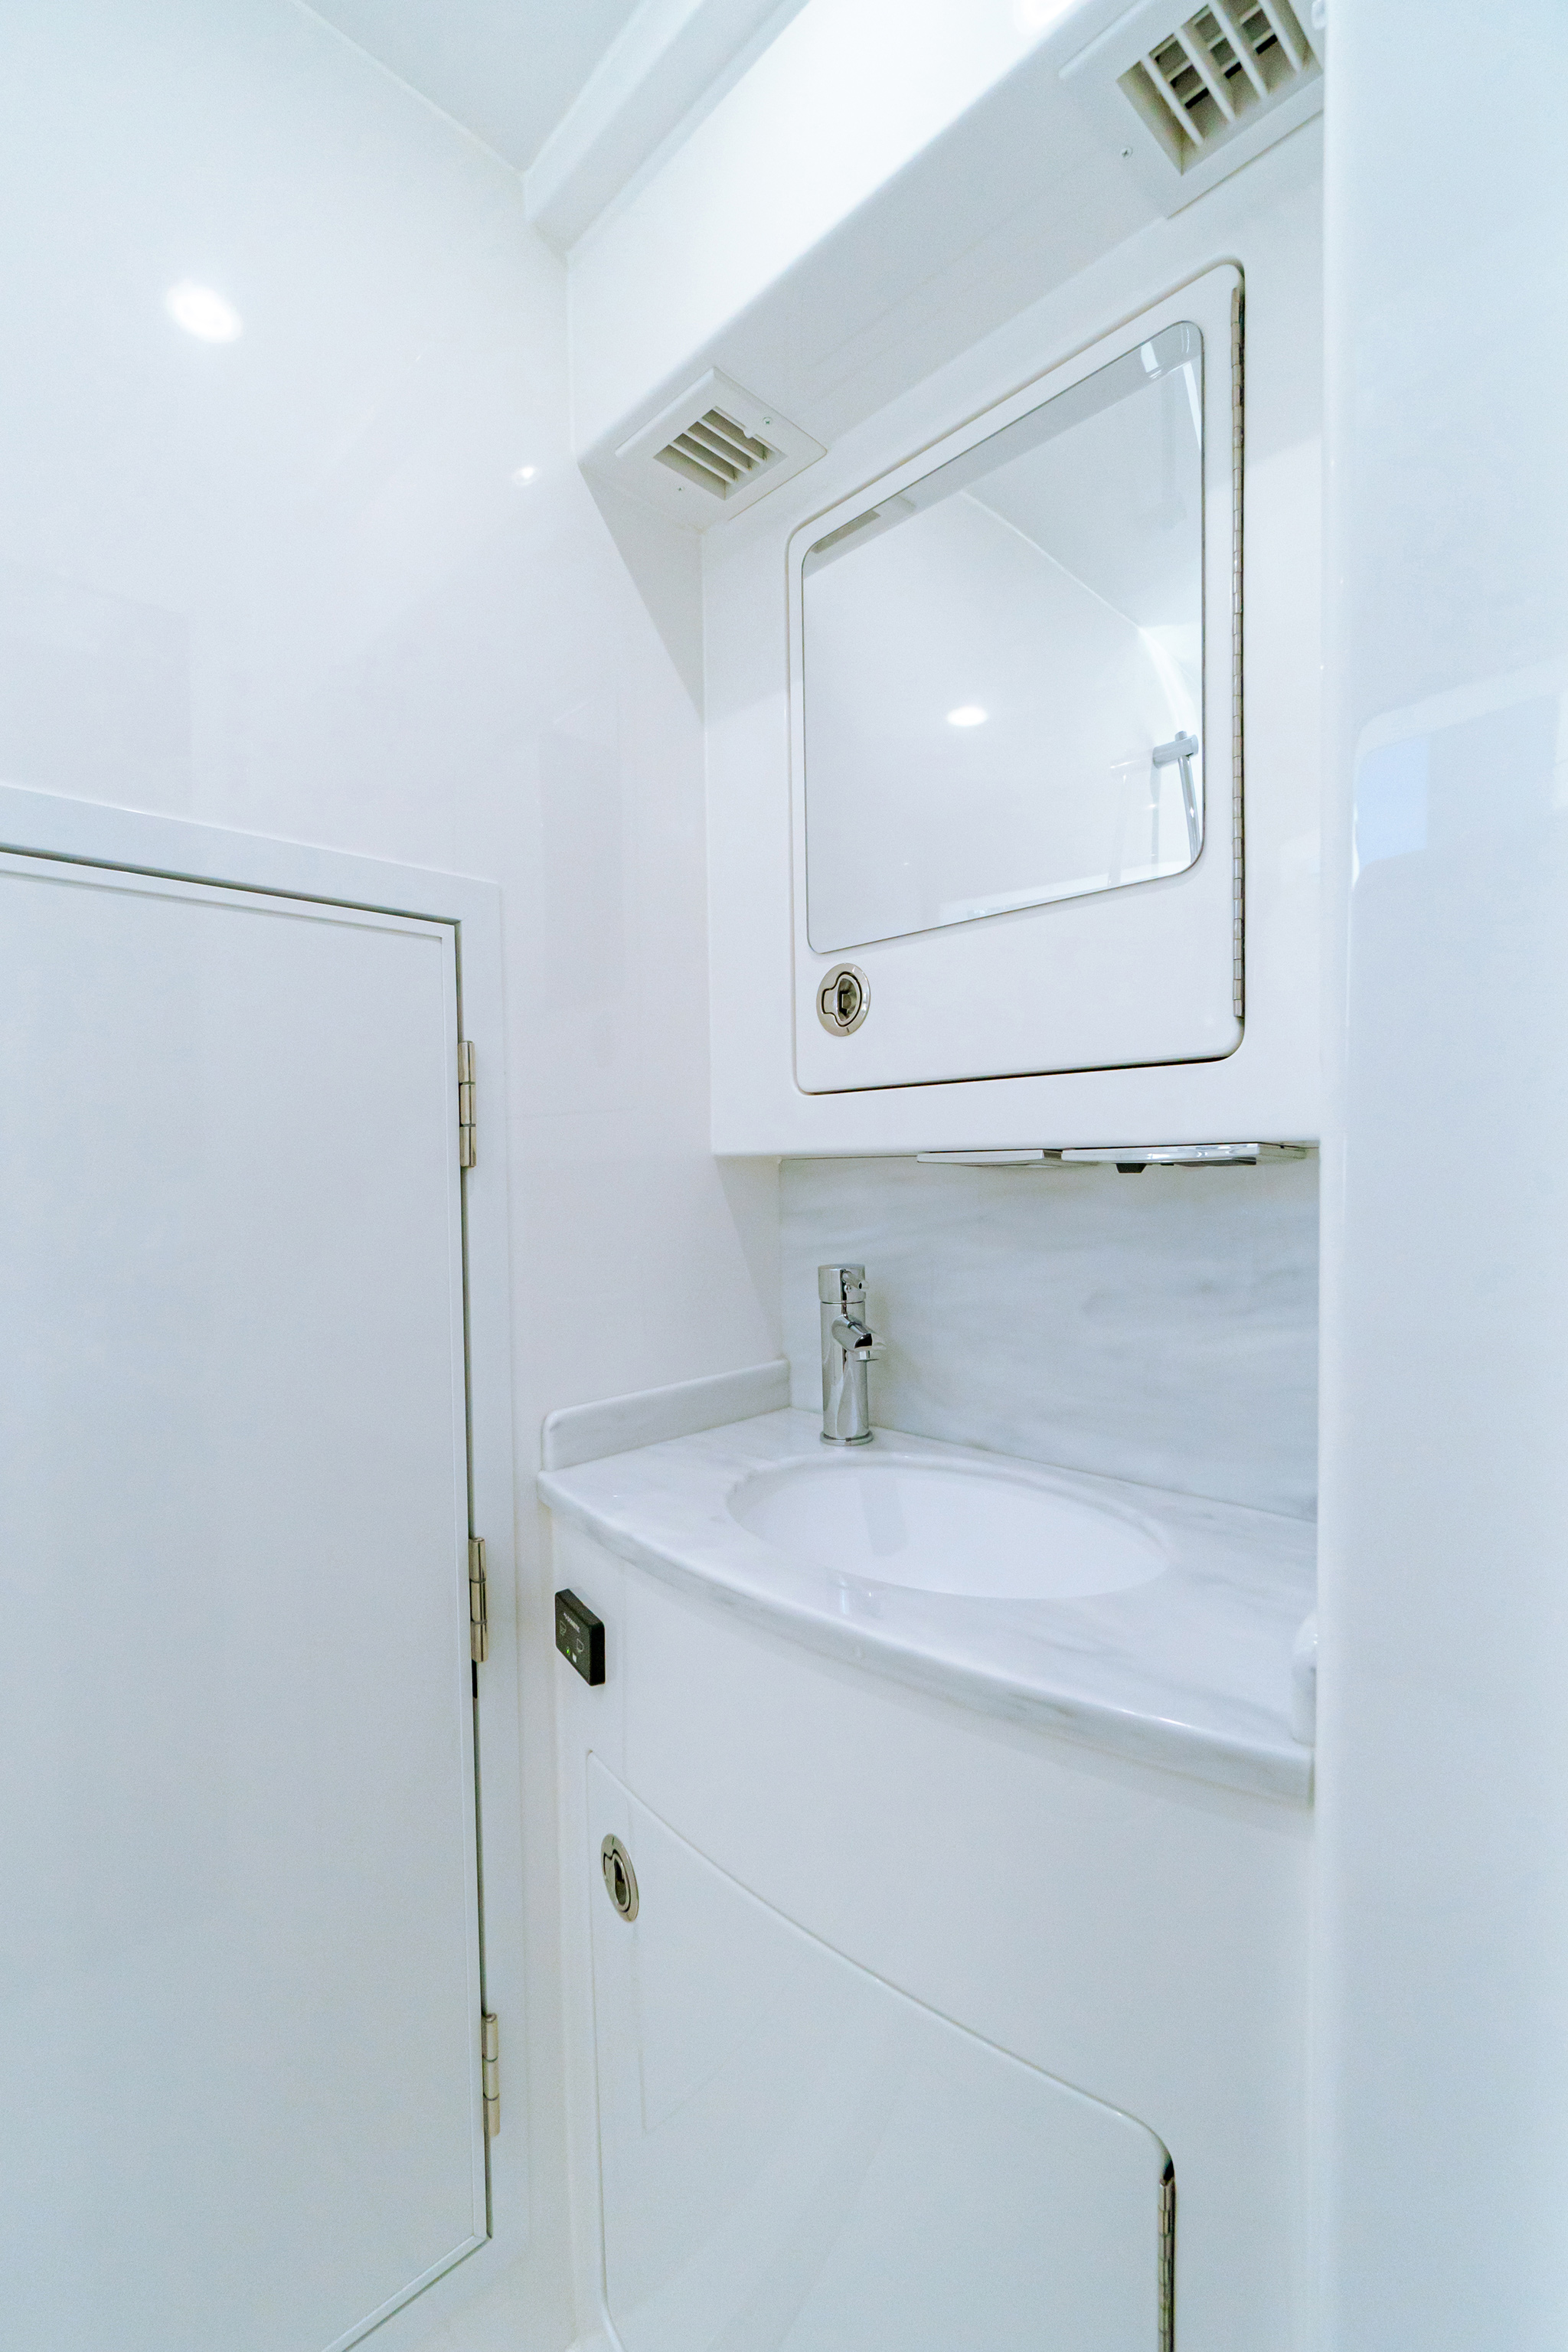 Enclosed head with molded-in vanity, sink, shower, access to machinery room.